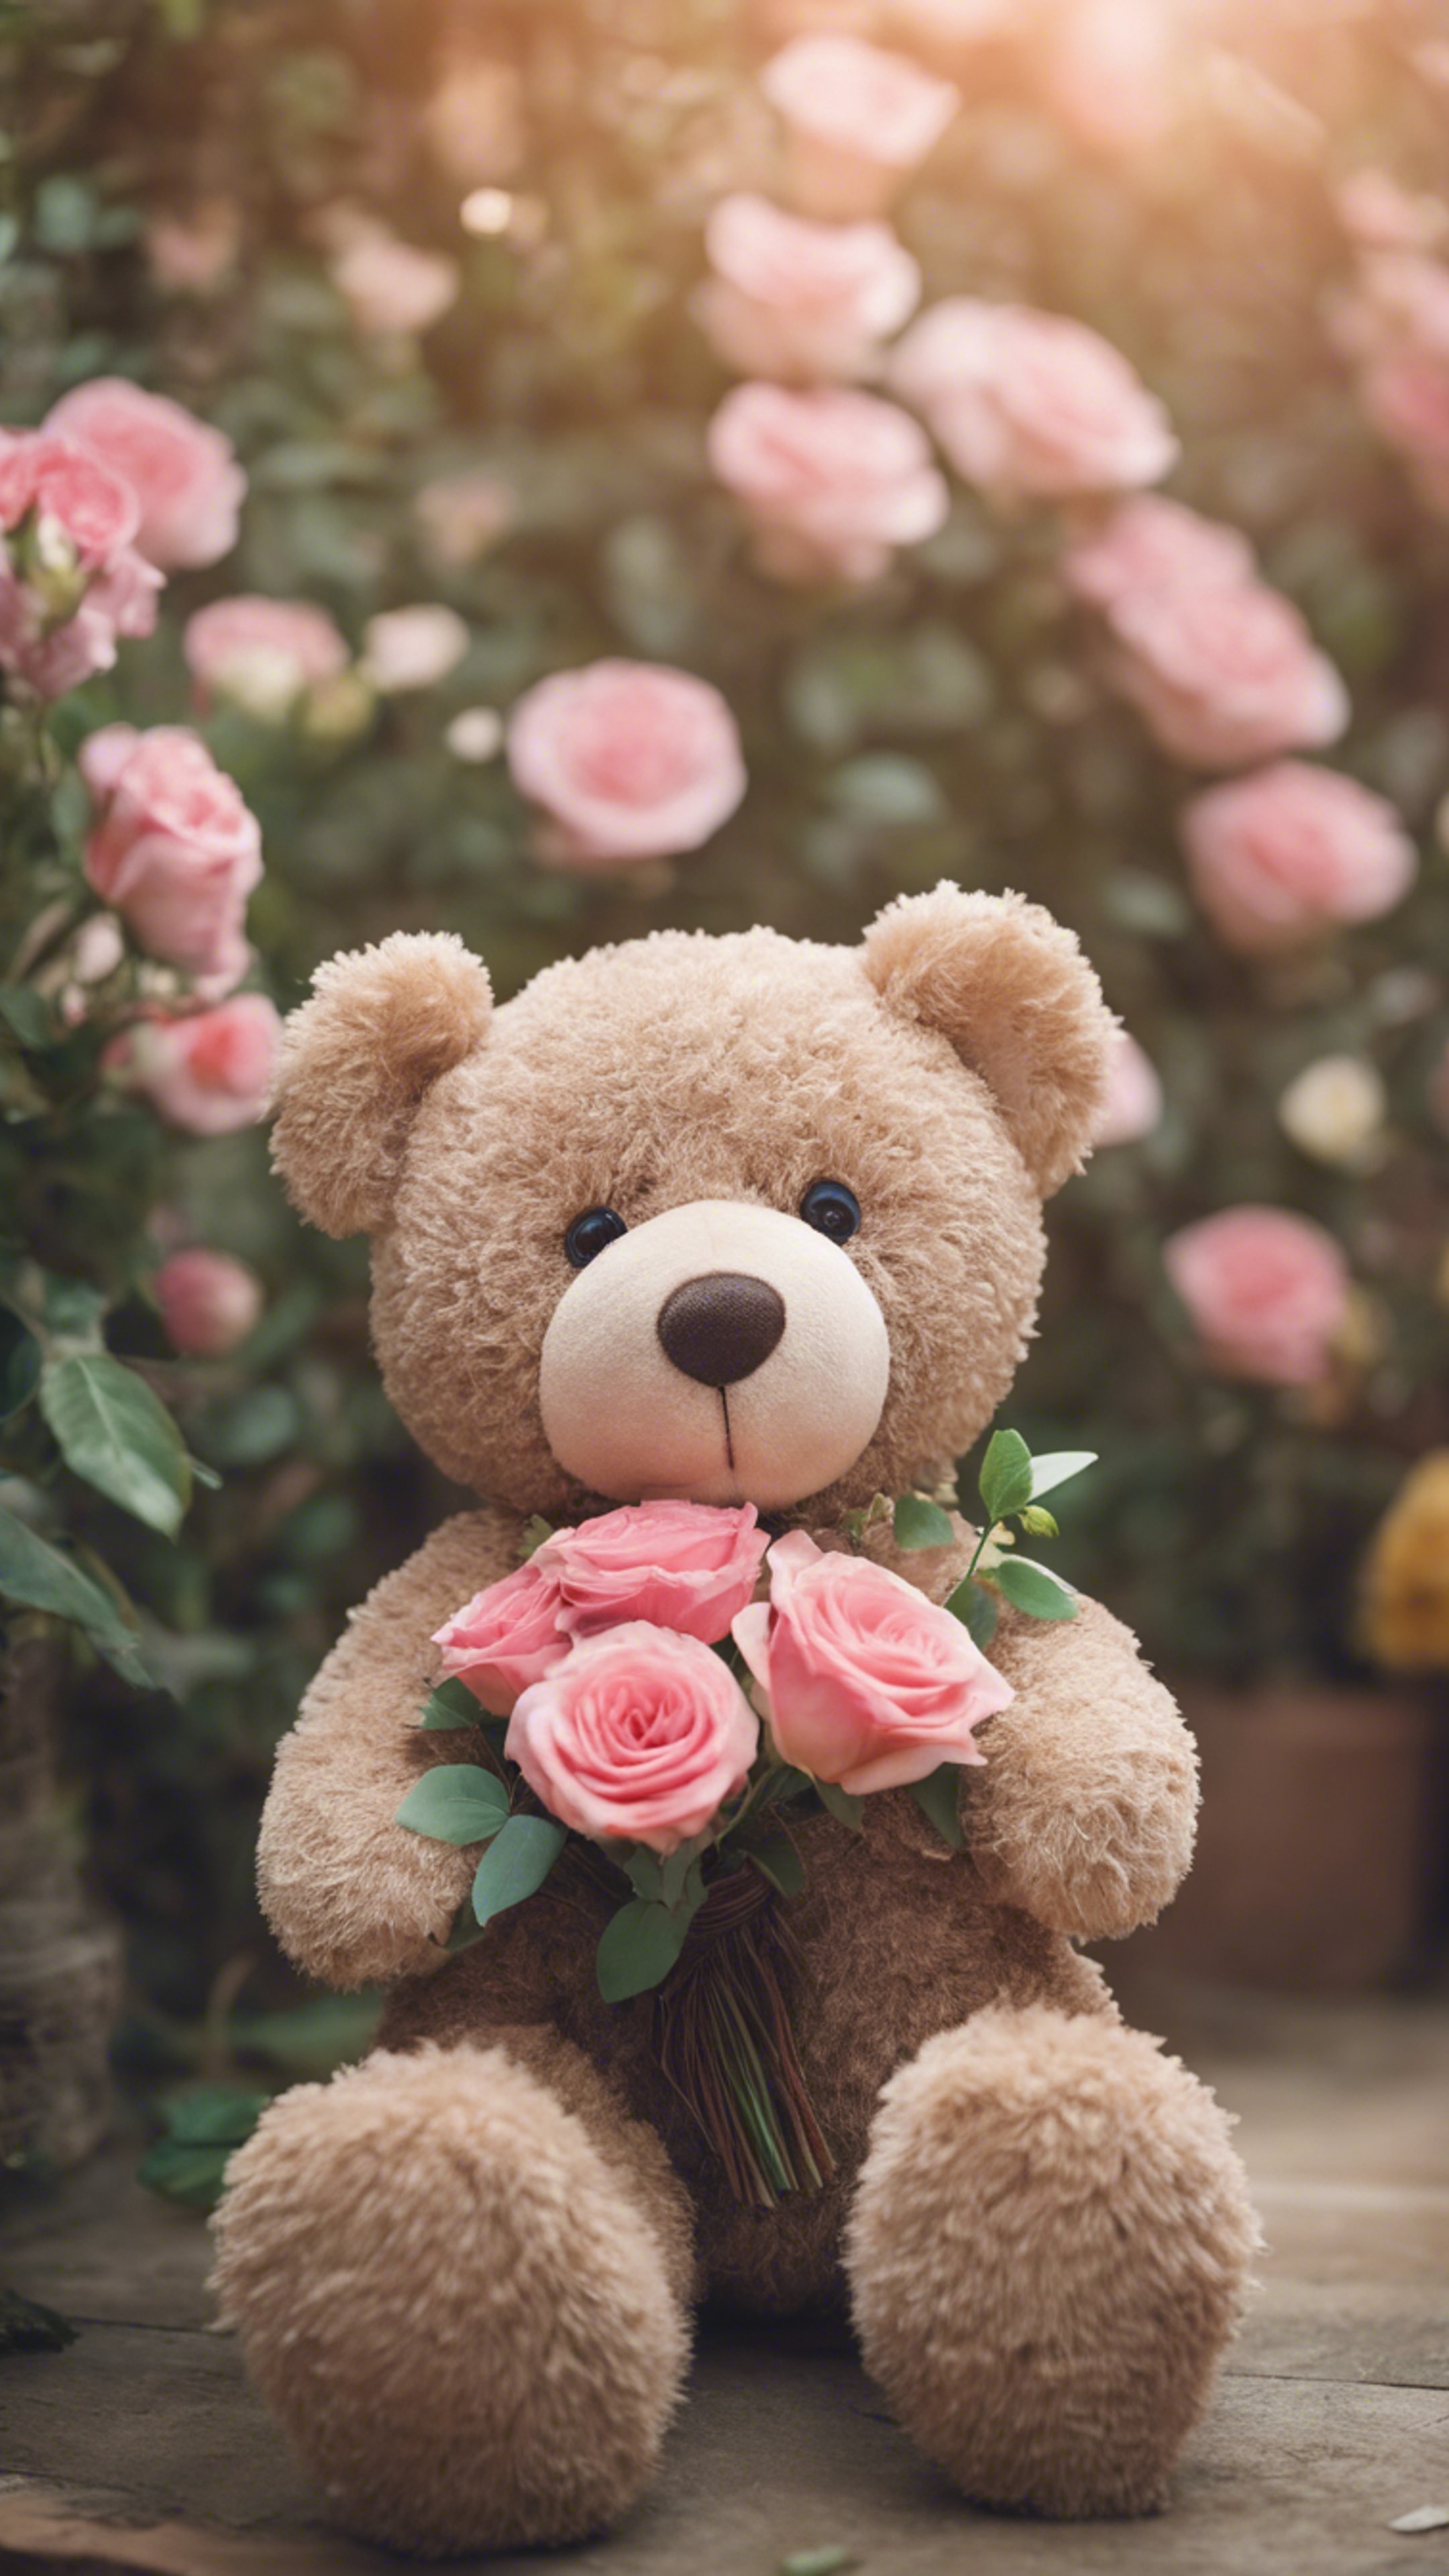 A teddy bear in a romantic setting, holding a bouquet of roses. Tapeet[0c0a94ba405548b0bff3]